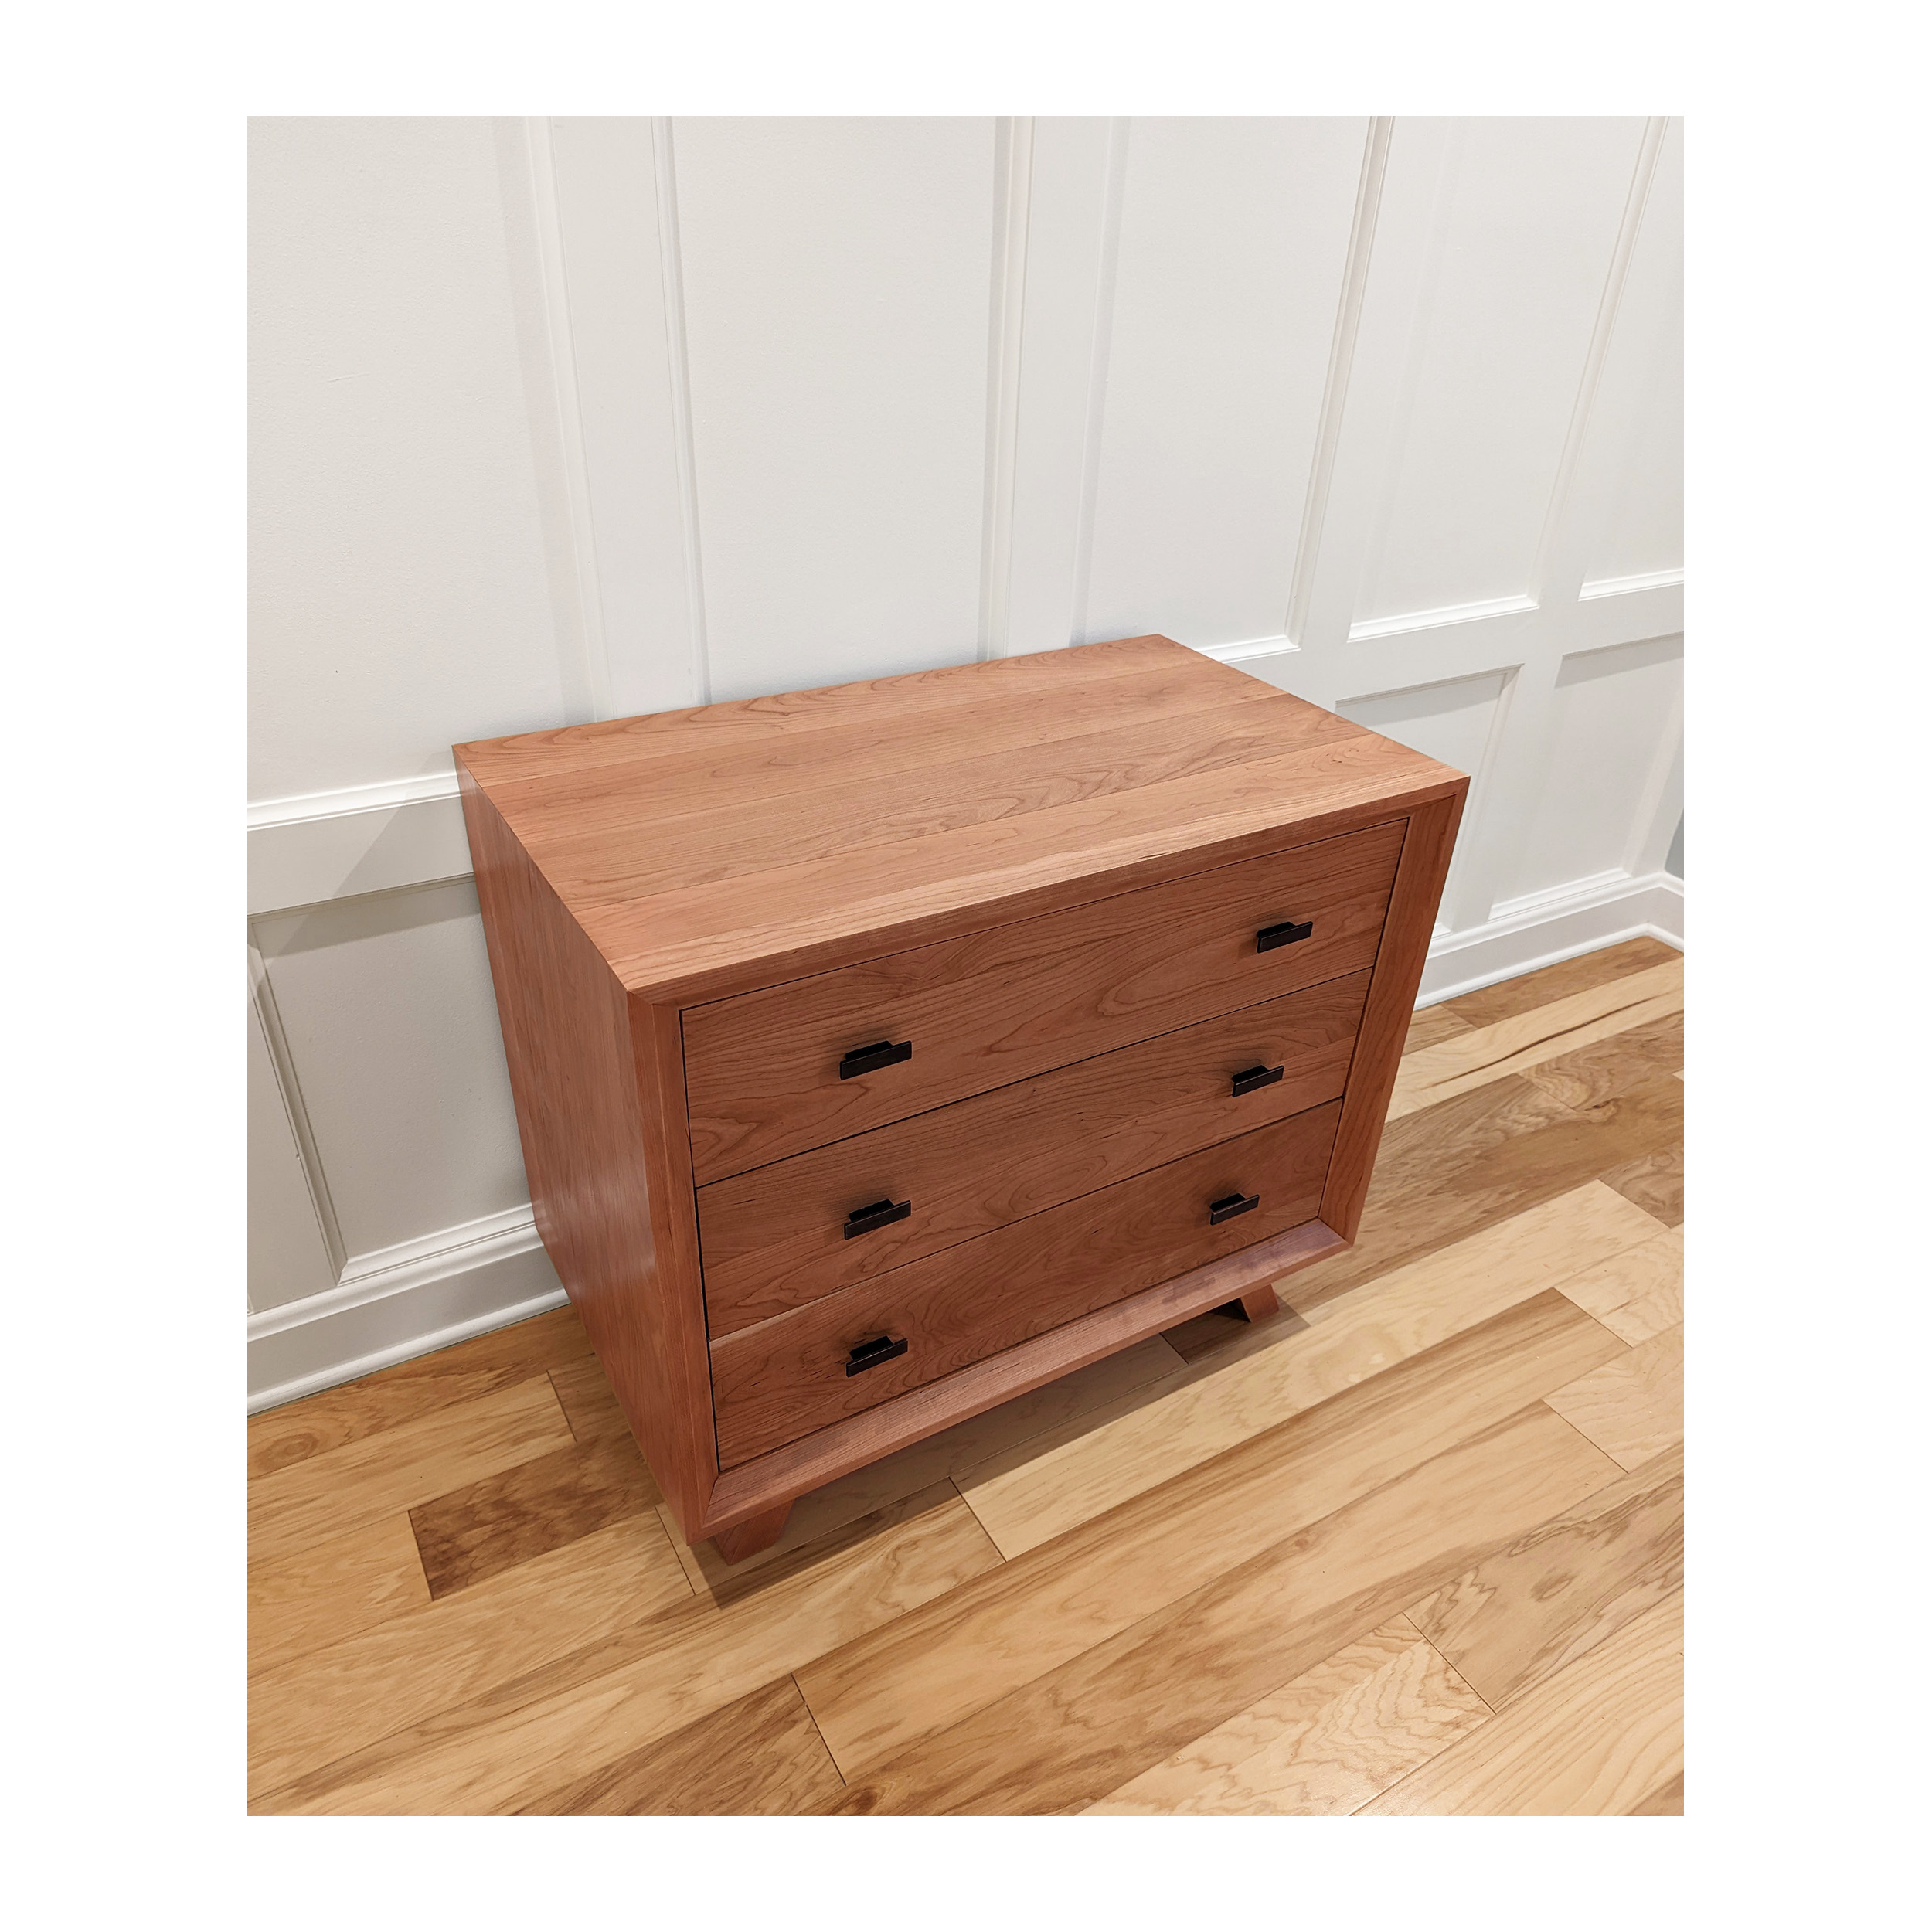 Modern Scandinavian Dresser Made With Solid Cherry Wood--Made By 57NorthPlank Tailored Modern Furniture